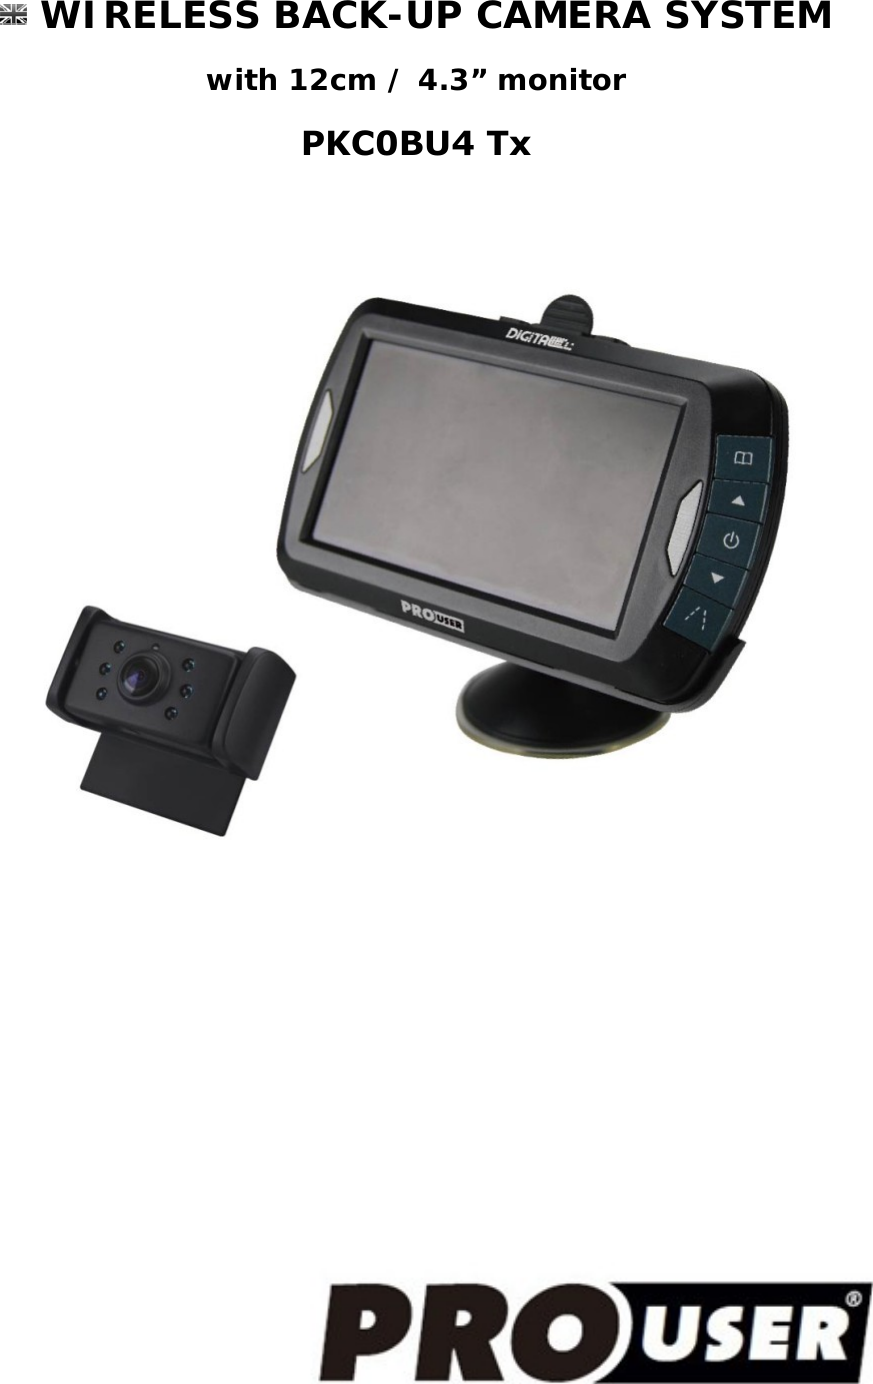  WIRELESS BACK-UP CAMERA SYSTEM with 12cm / 4.3” monitor PKC0BU4 Tx 